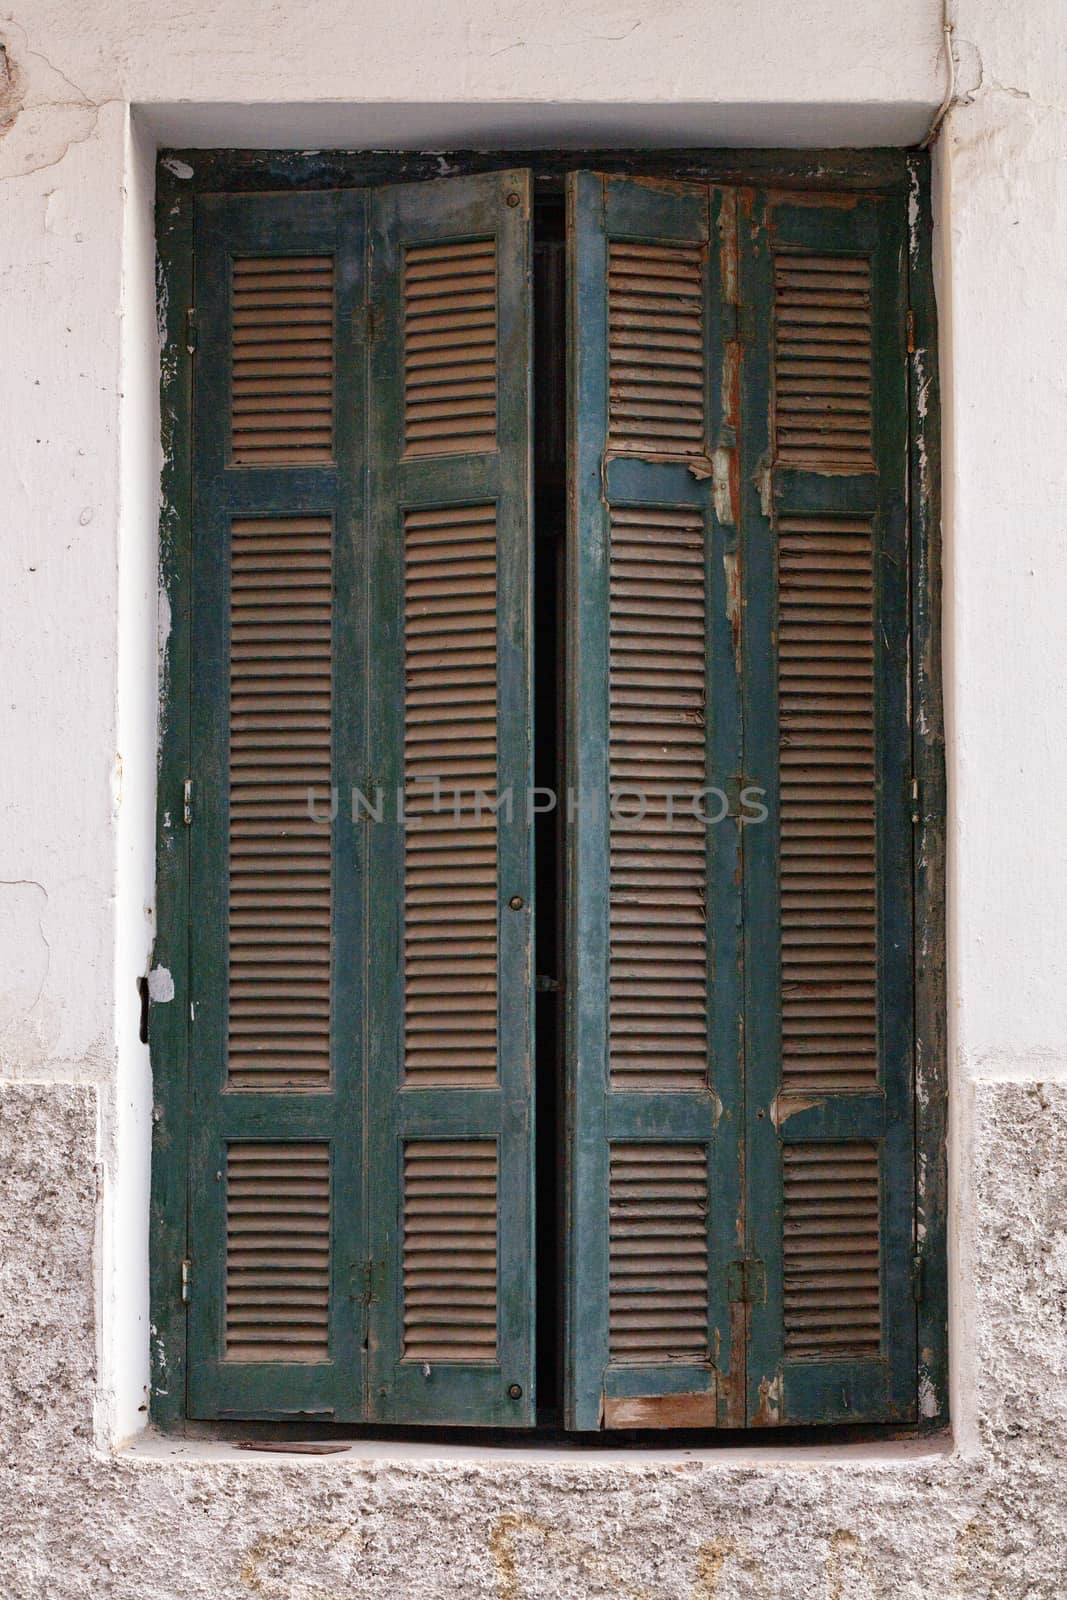 Old green wooden shutters are ajar on the old window against the background of the facade of the house.